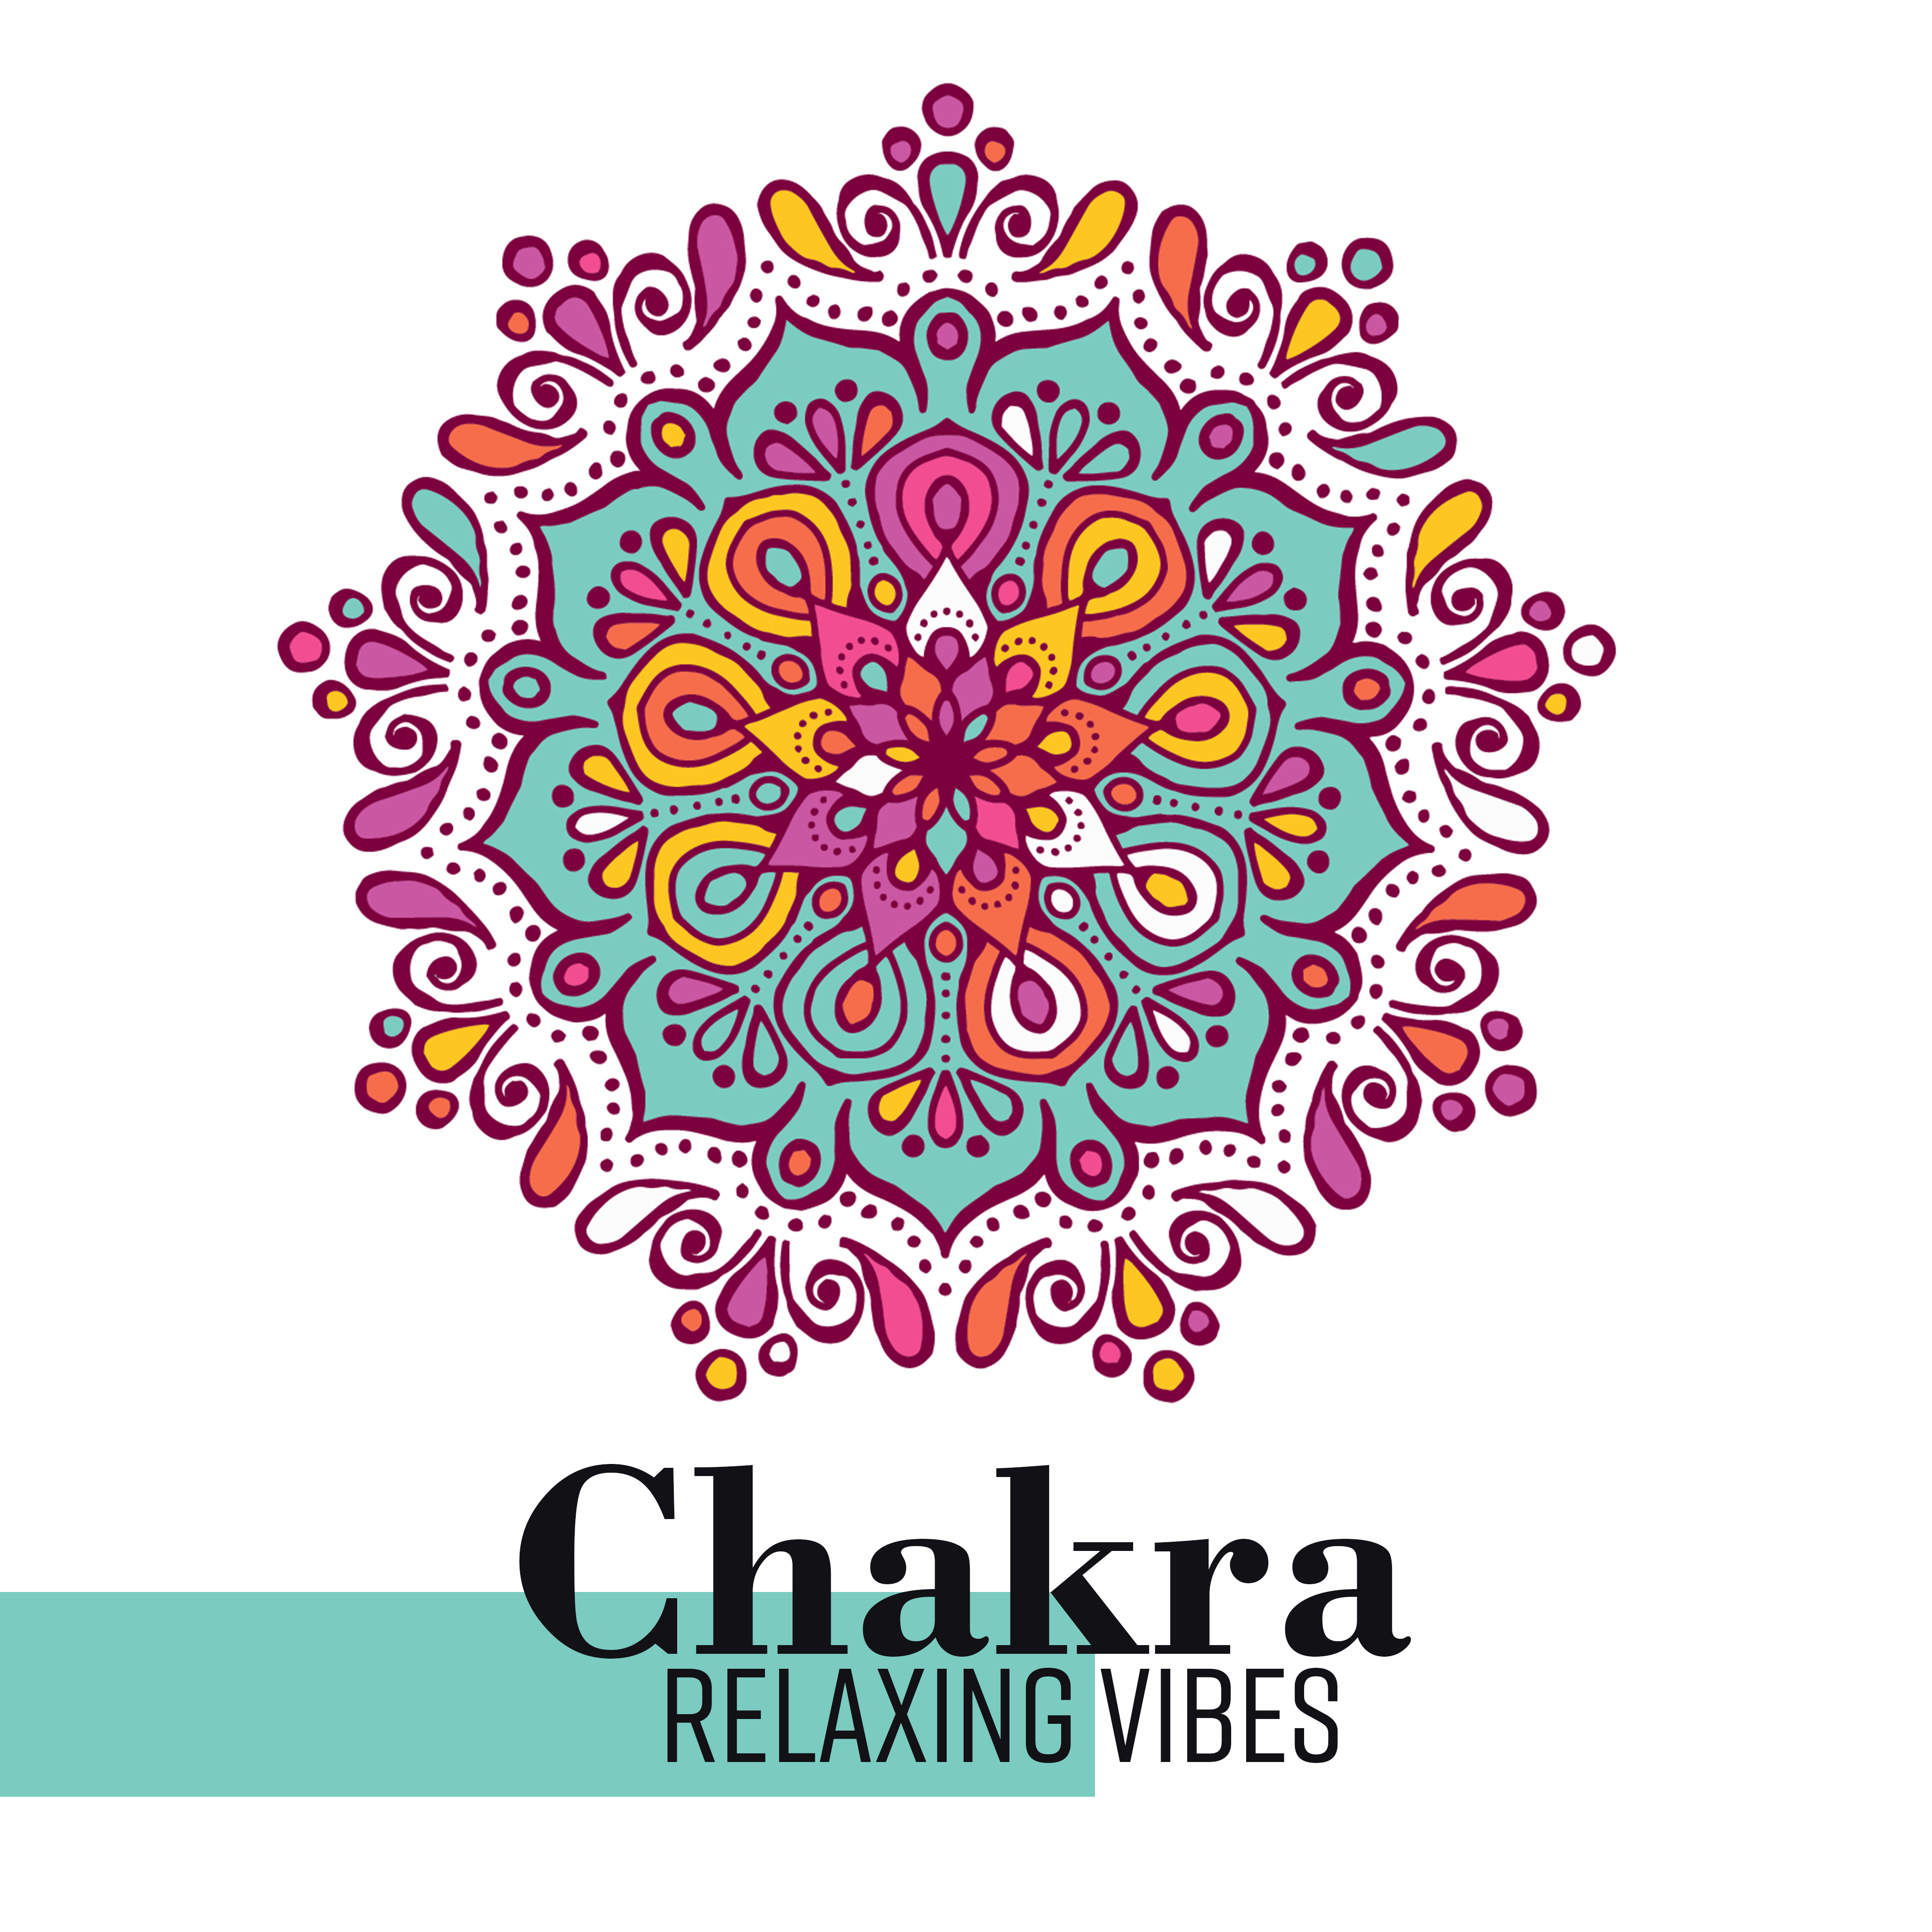 Chakra Relaxing Vibes